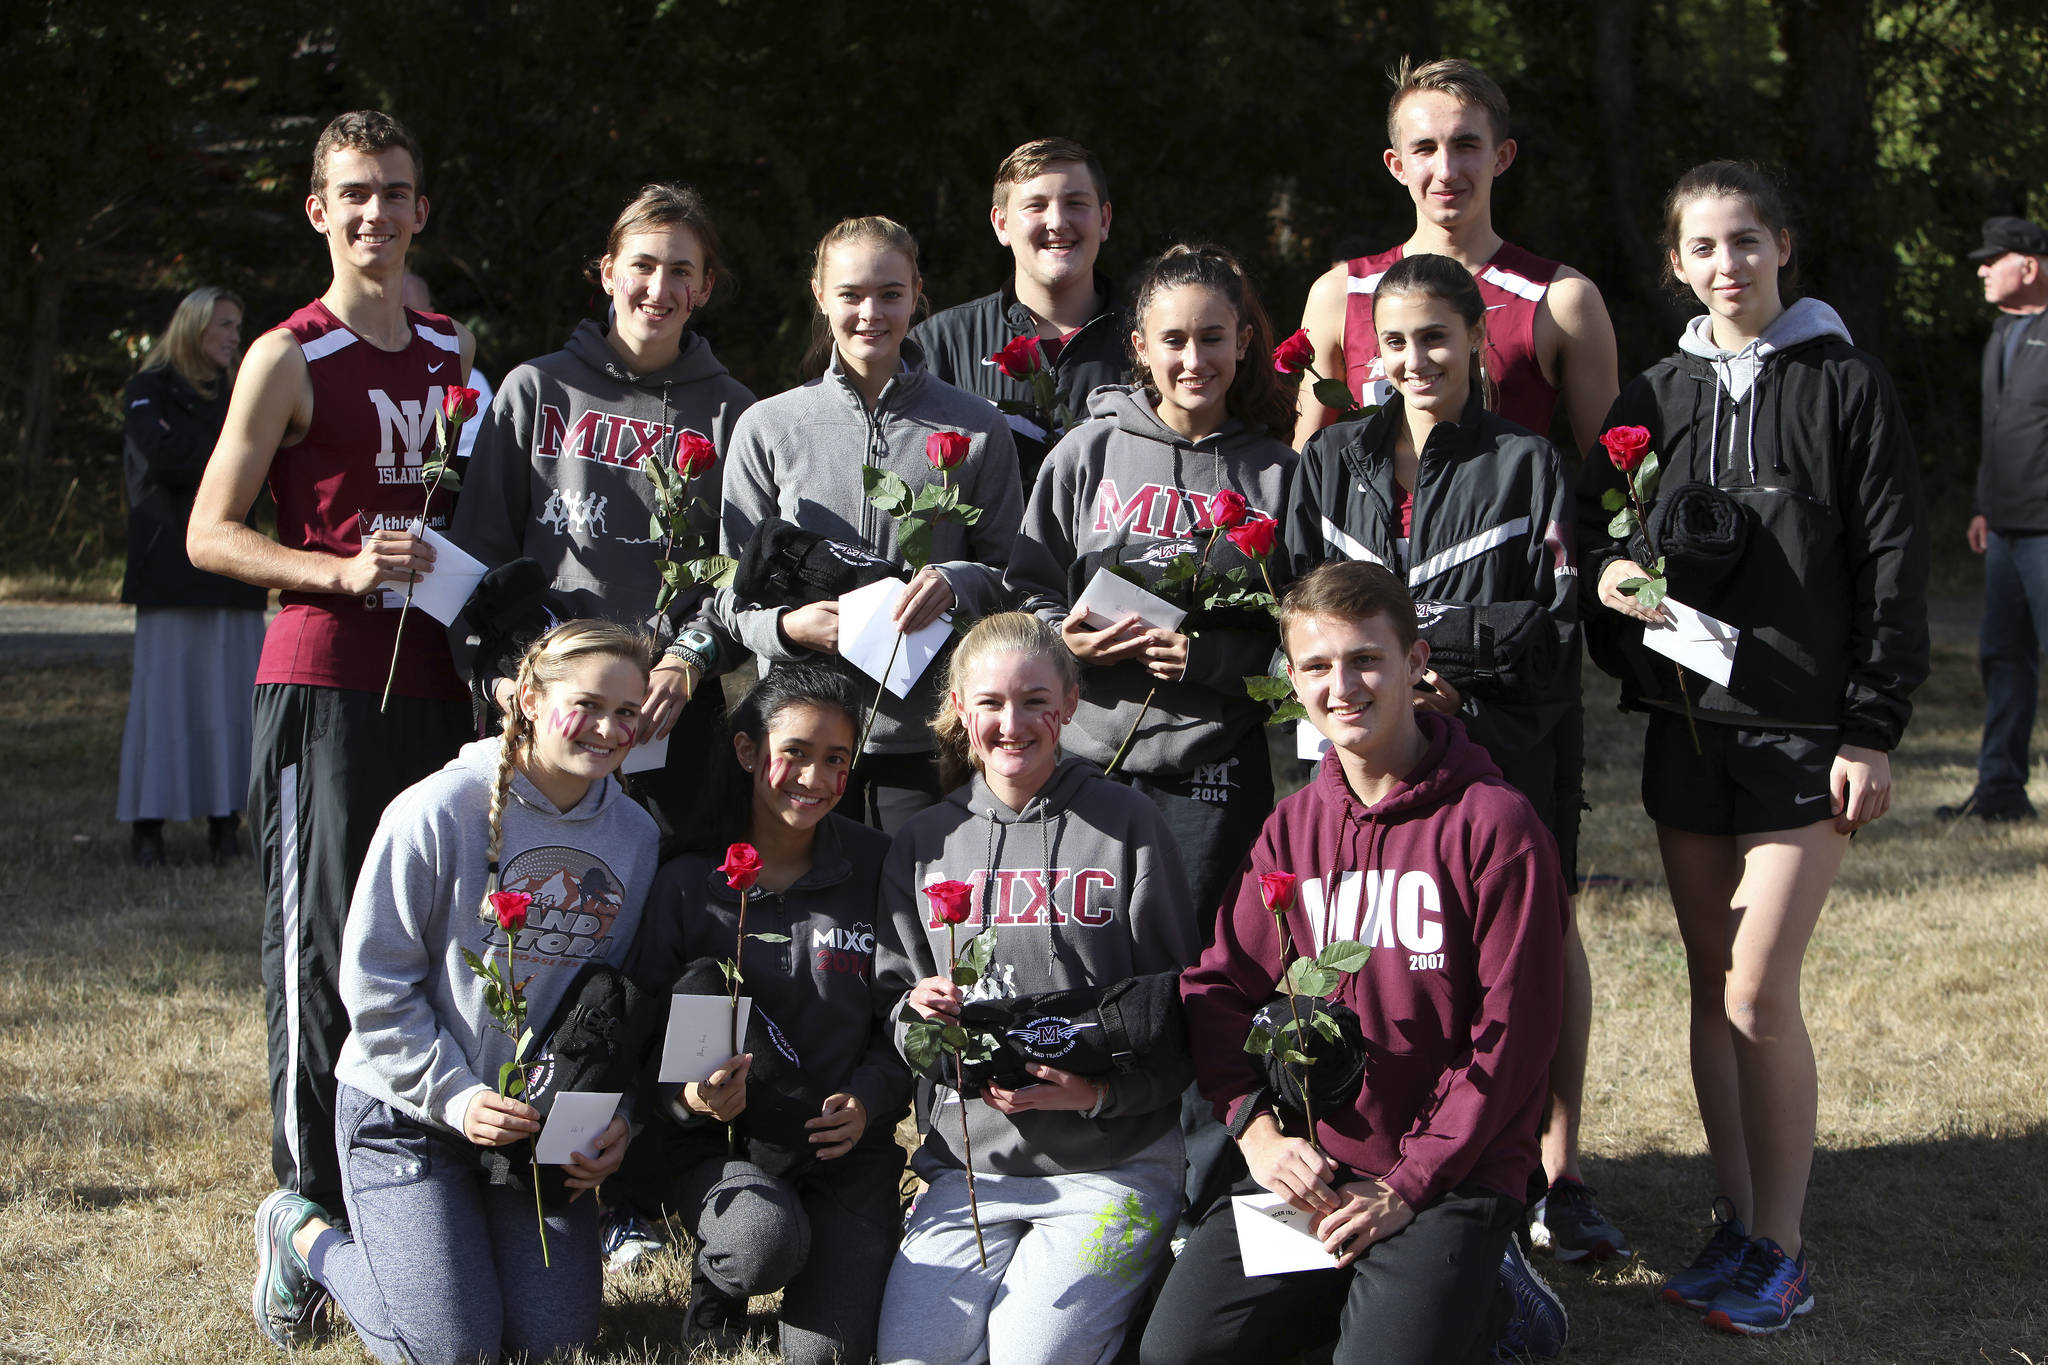 Photo courtesy of Jay Na                                The Mercer Island girls and boys cross country teams put together memorable performances on senior night on Sept. 20 at Luther Burbank Park in Mercer Island.                                The Islanders girls squad captured first place in the meet, tallying 36 total team points (low score wins in cross country). Lake Washington finished in second place with 38 points and Liberty collected third place with 46 points. Mercer Island junior Margaret Baker finished in first place in the meet with a time of 19 minutes, 51 seconds.                                Islanders’ senior Mary Rose Vu earned second place with a time of 20:32. Mercer Island senior Chloe Michaels registered an eighth-place finish (21:33).                                In boys action, Liberty tallied a first place showing with 26 points. Lake Washington earned second place with 38 points and Mercer Island finished in third place with 68 team points. Islanders’ junior Alexander Benson finished in sixth place with a time of 18:03. Jaden Krauser finished in eight place with a time of 18:24.                                Mercer Island senior cross country athletes on the girls and boys squads are pictured in the above photo.